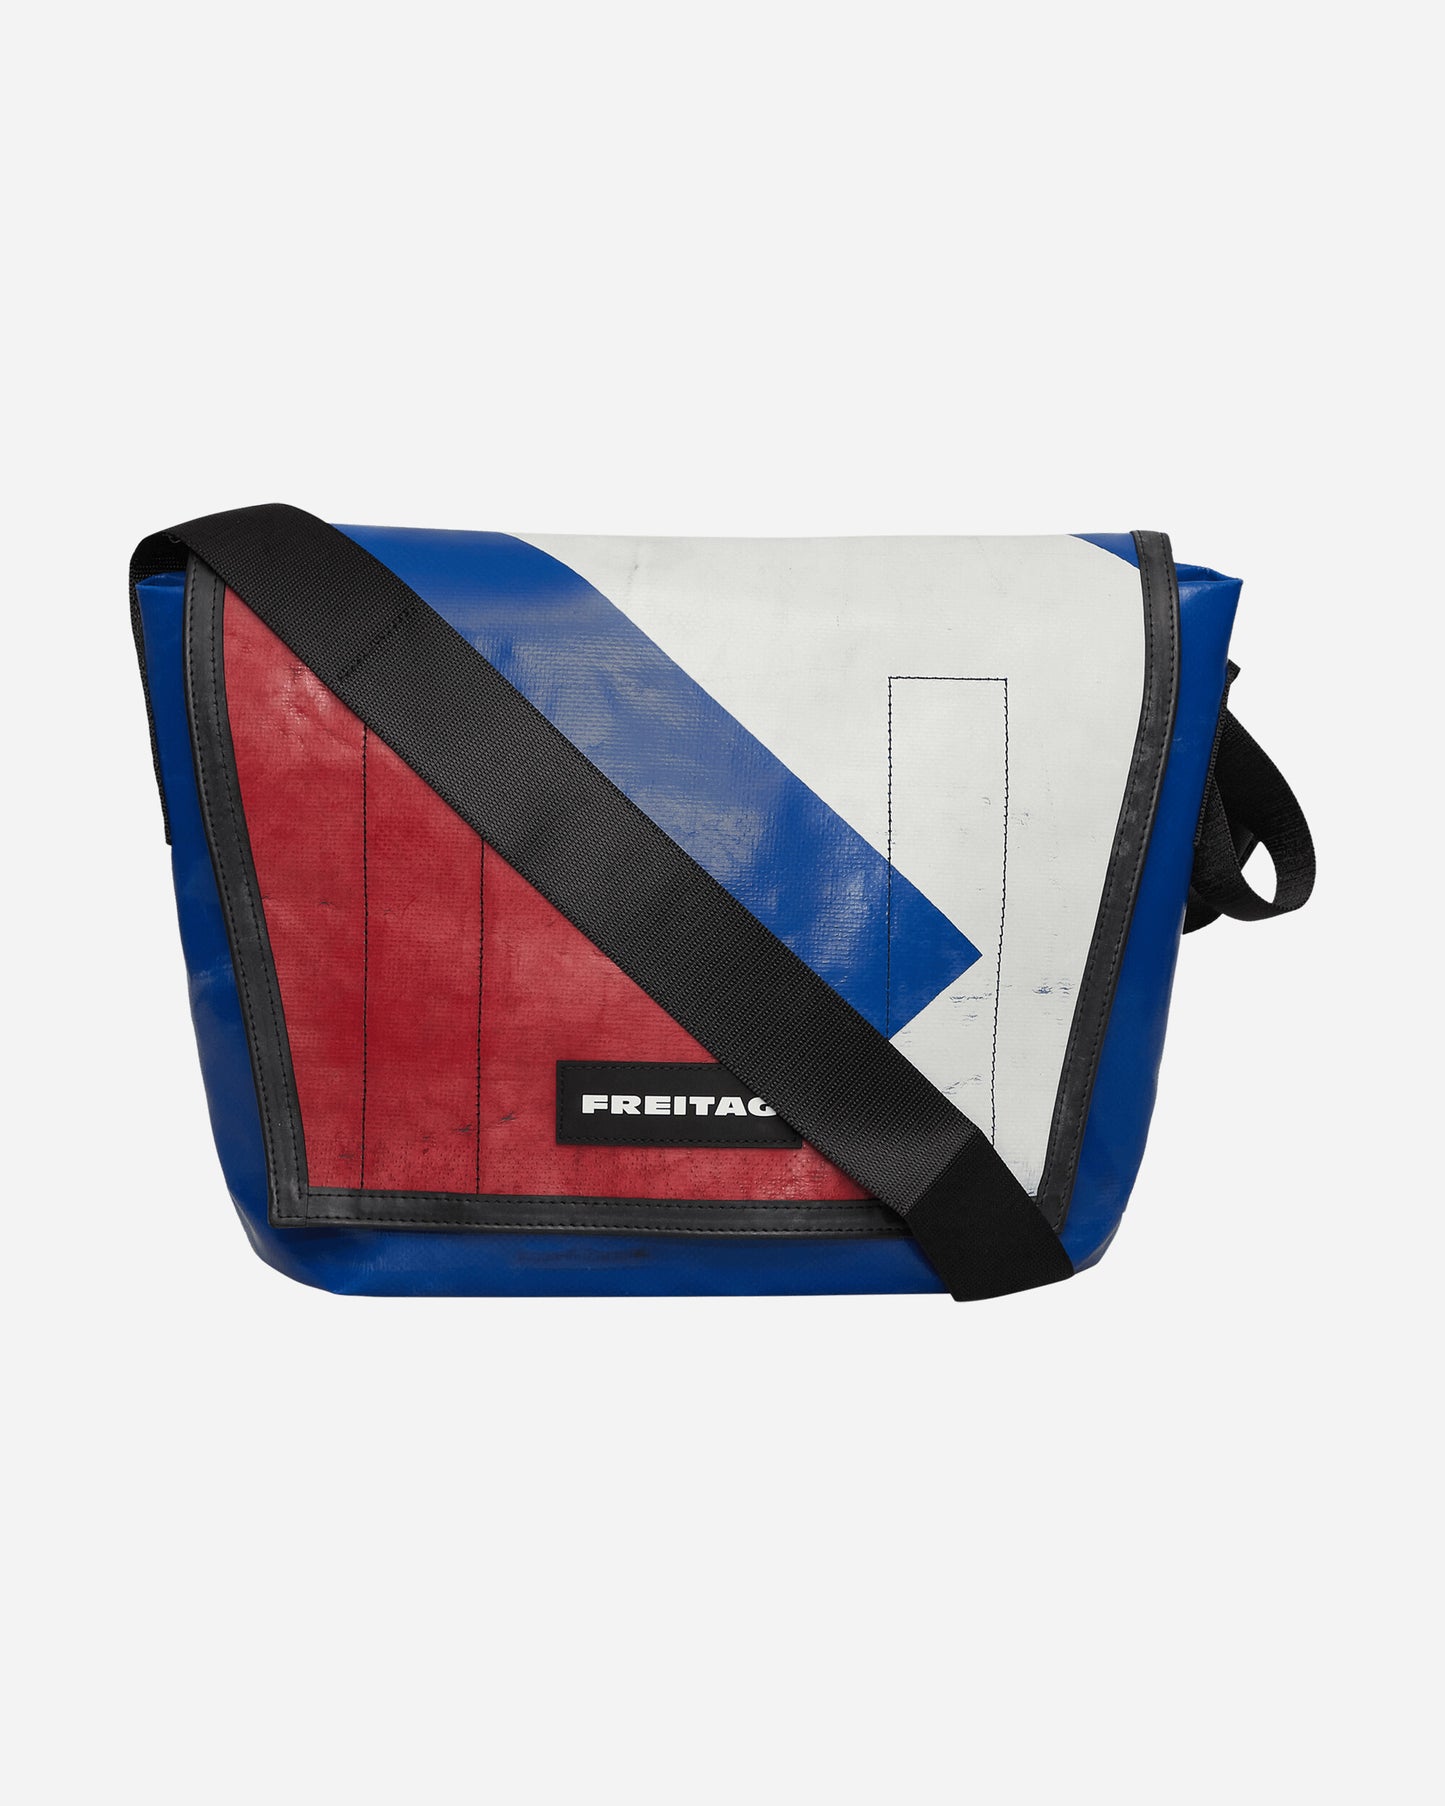 Freitag Dexter Multi Bags and Backpacks Shoulder Bags FREITAGF14 002